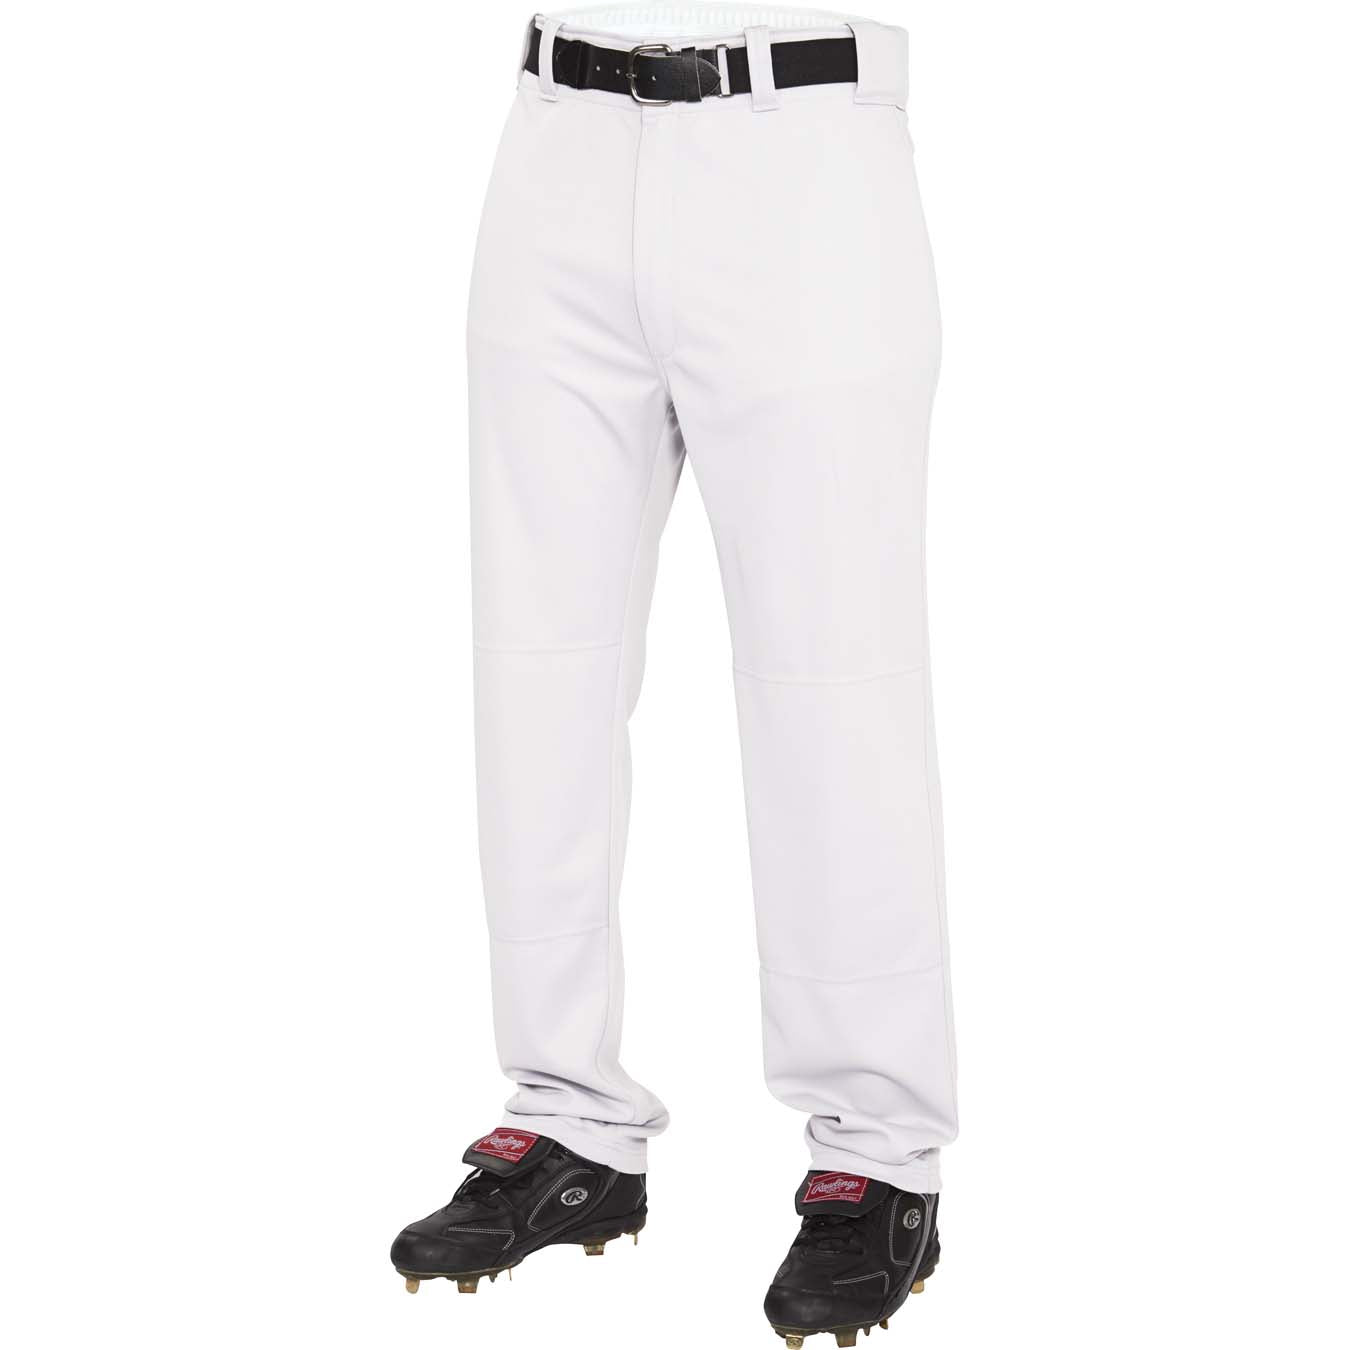 Rawlings Relaxed Fit League Pant Youth